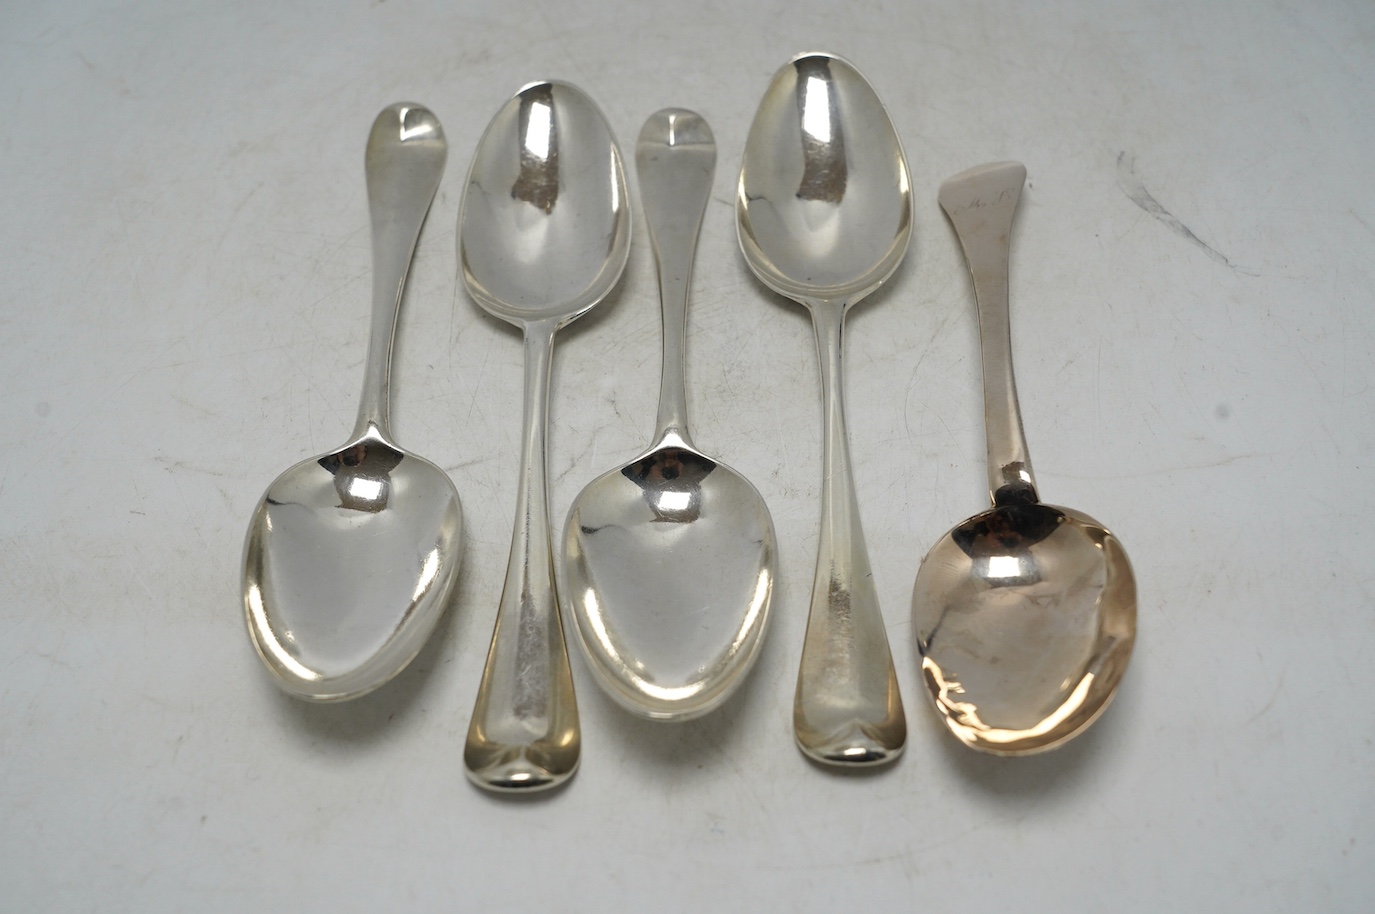 An early 18th century? silver dog nose spoon, indistinct marks, 19.2cm, together with a set of four George II silver table spoons, with lace back bowls, by William Turner, London, 1755, 10.6oz. Condition - poor to fair  